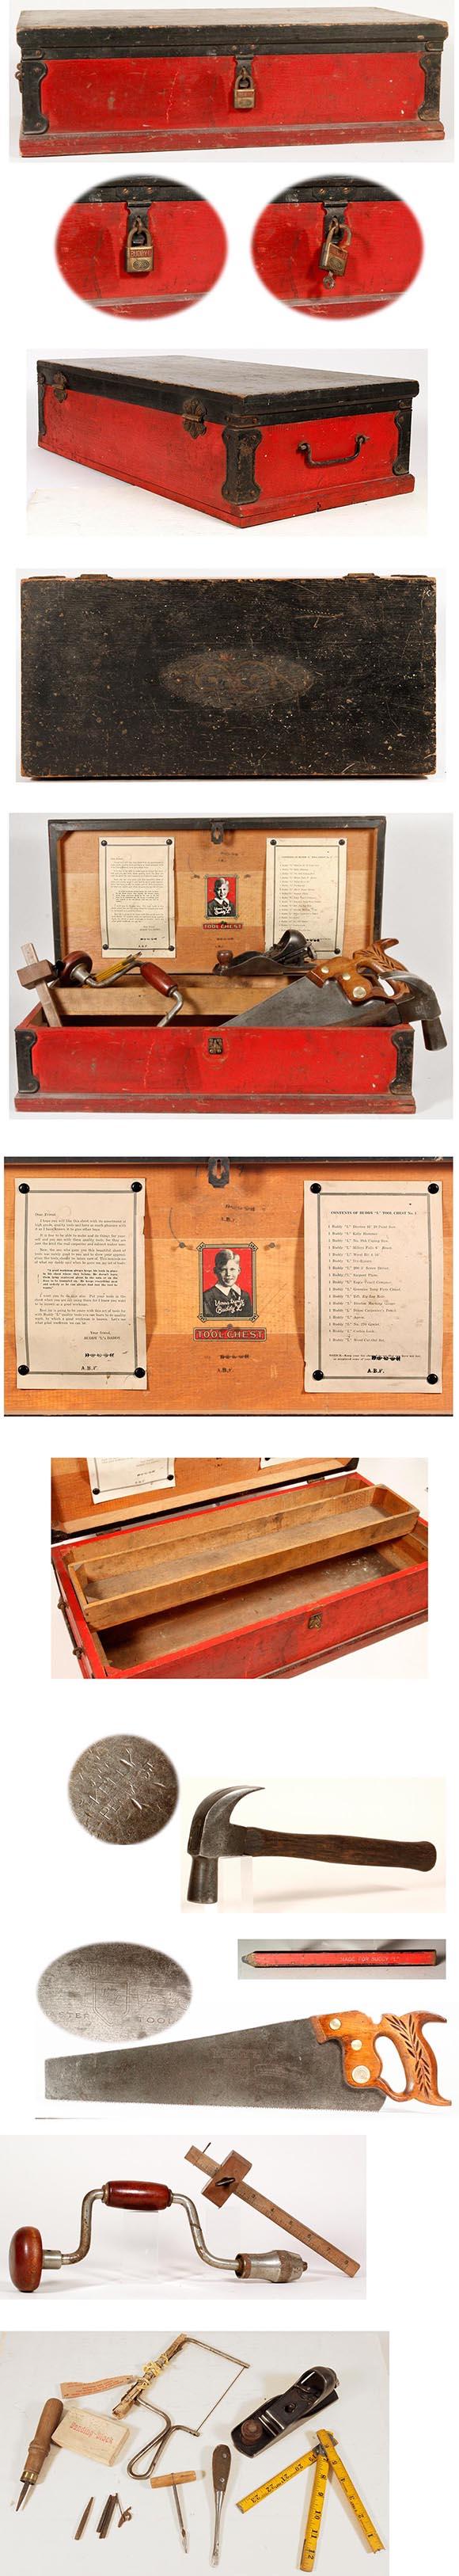 1927 Buddy L No. 1 Tool Chest in Original Wooden Box